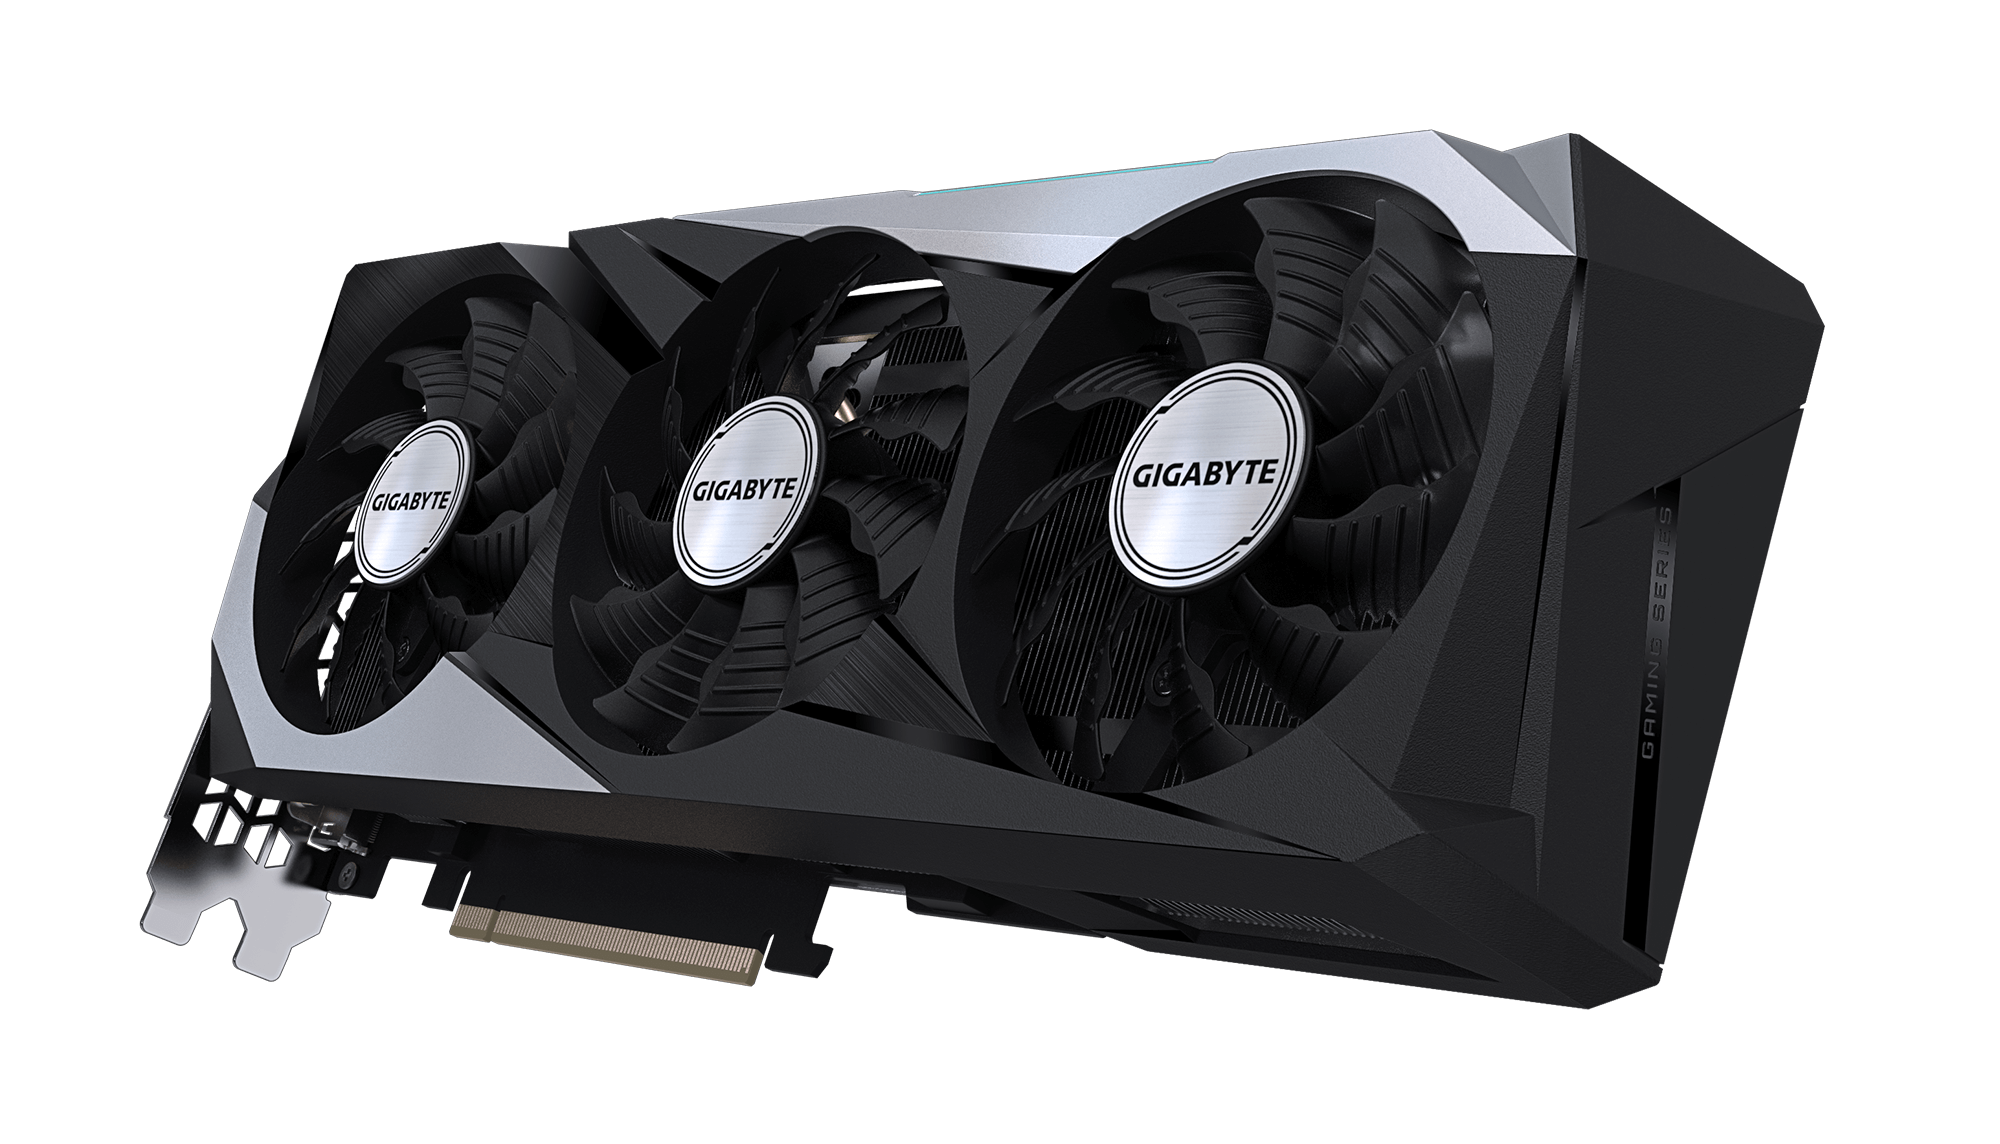 GeForce RTX™ 3060 Ti GAMING OC 8G (rev. 1.0) Key Features